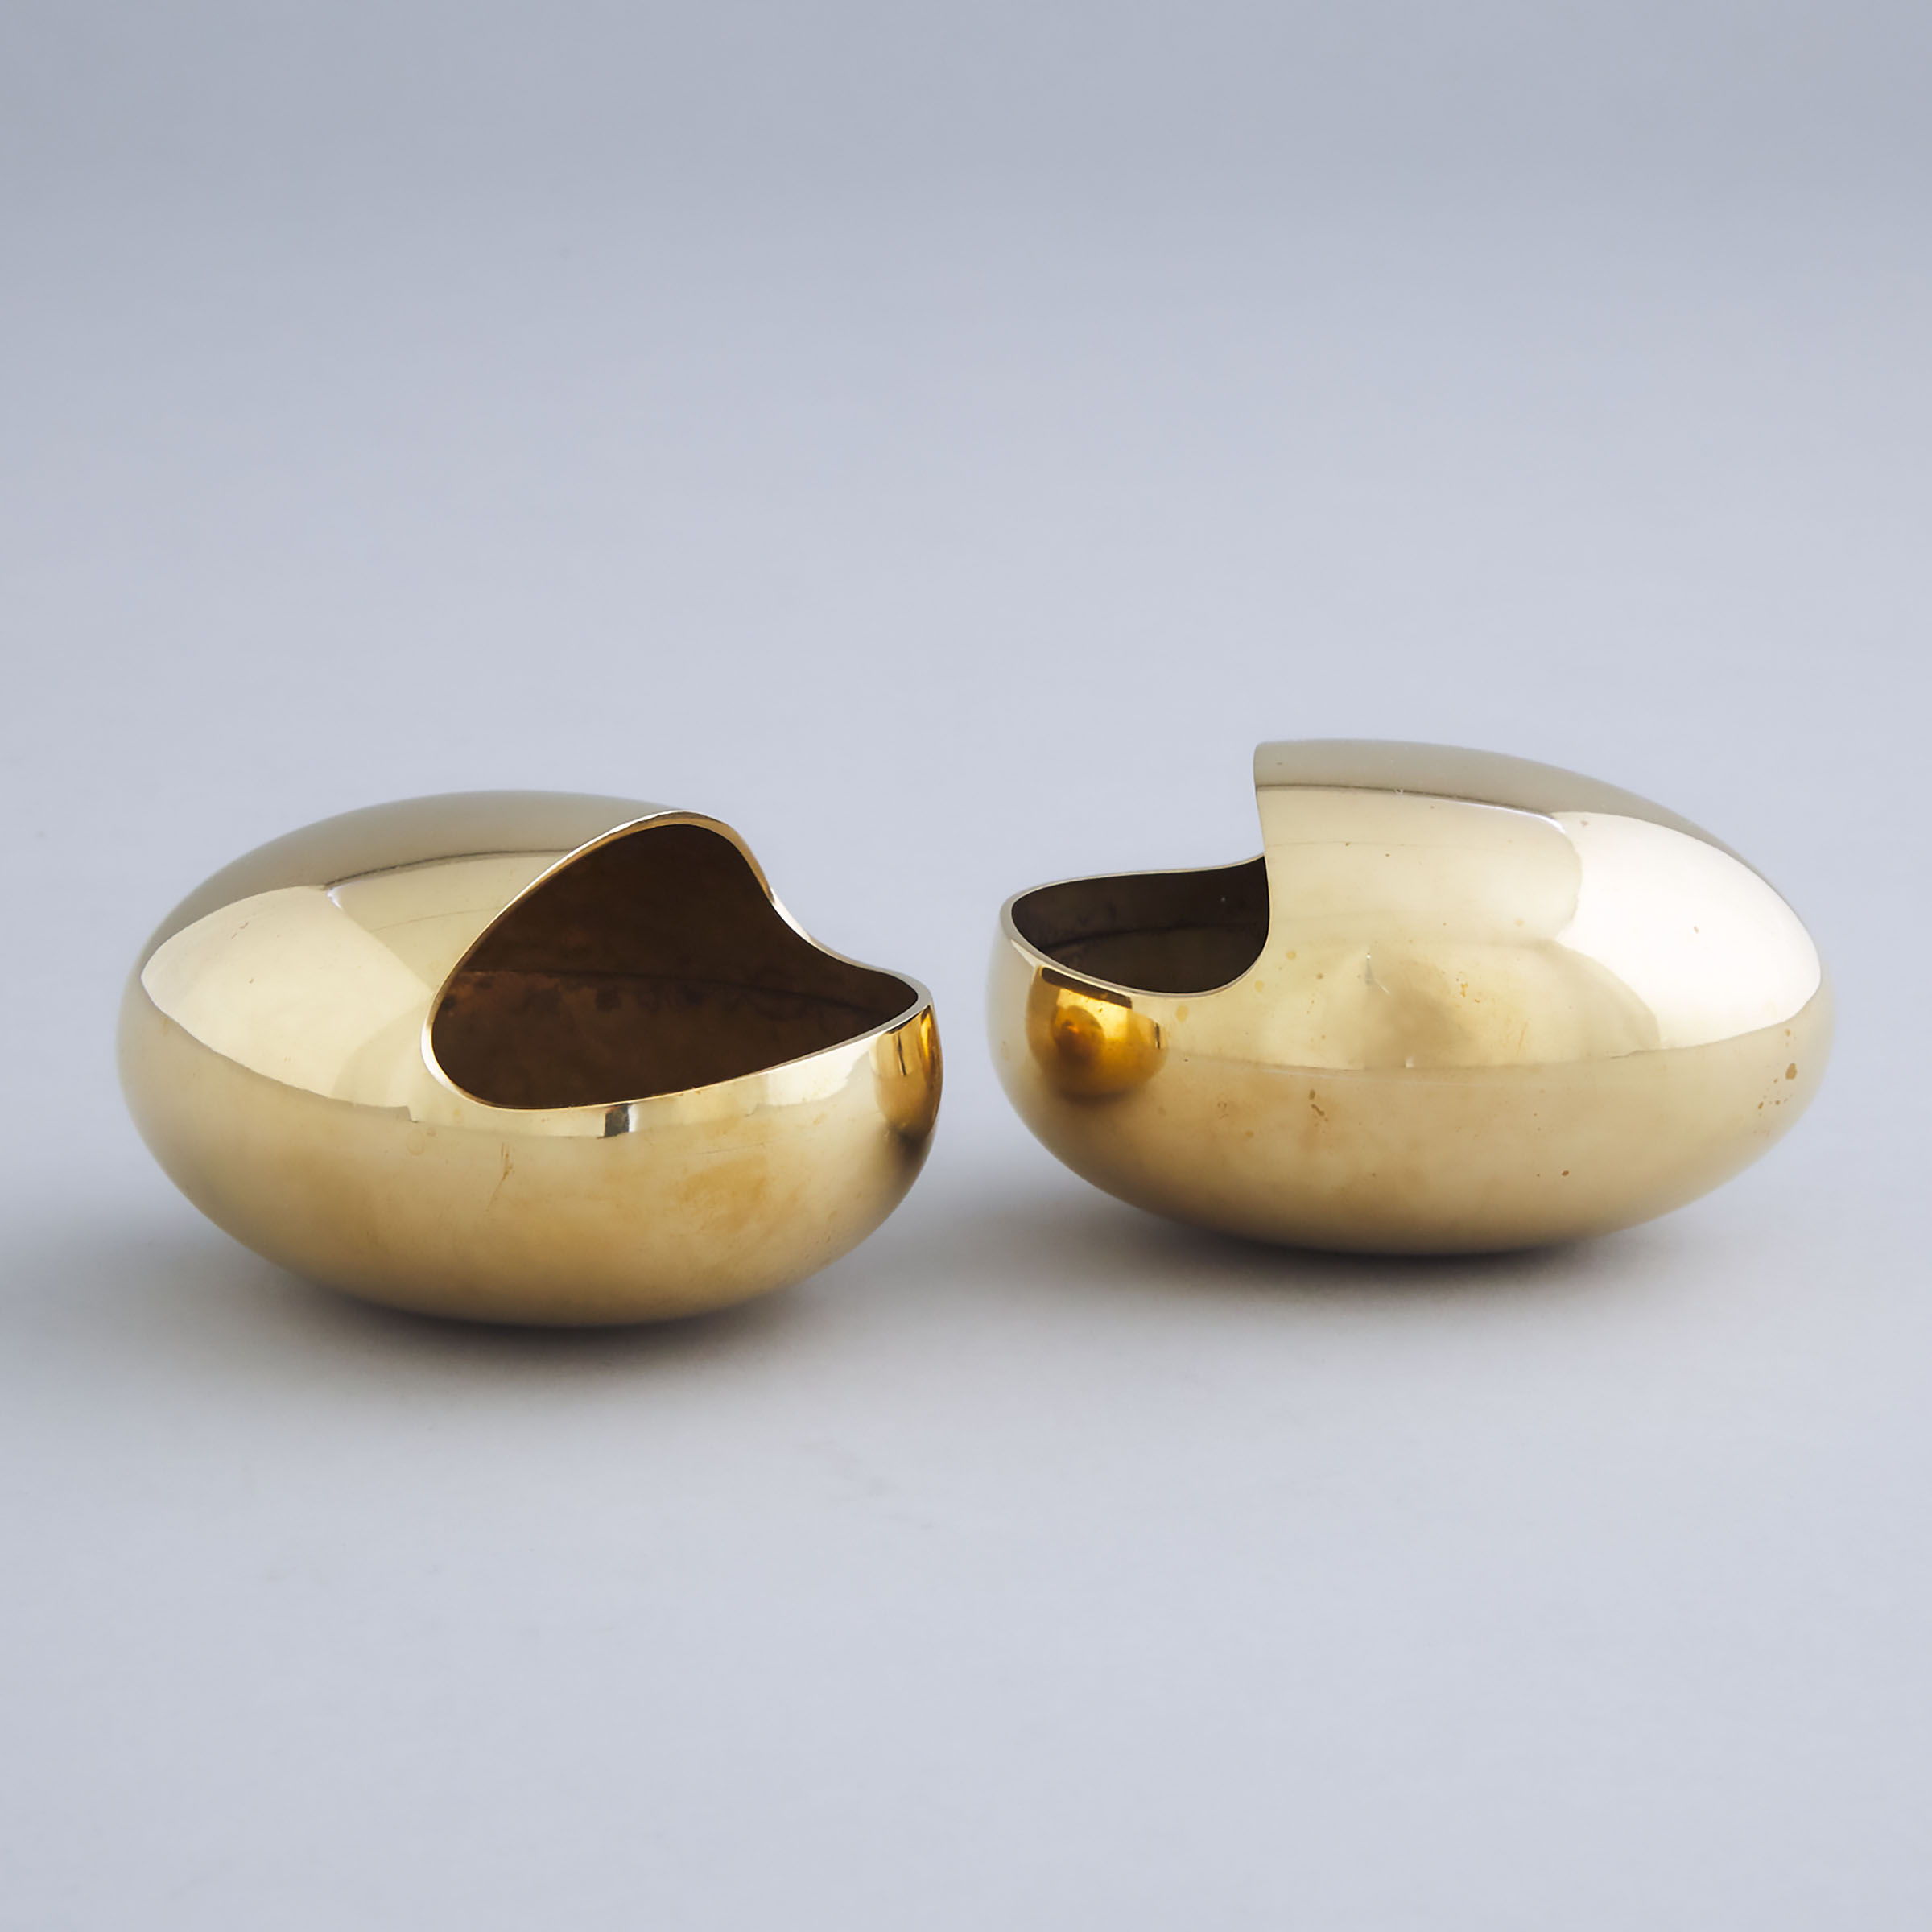 Two Danish Modern Bronze 'Smile' Ashtrays by Hans Bunde for Carl M. Cohr Silver Co. c.1955